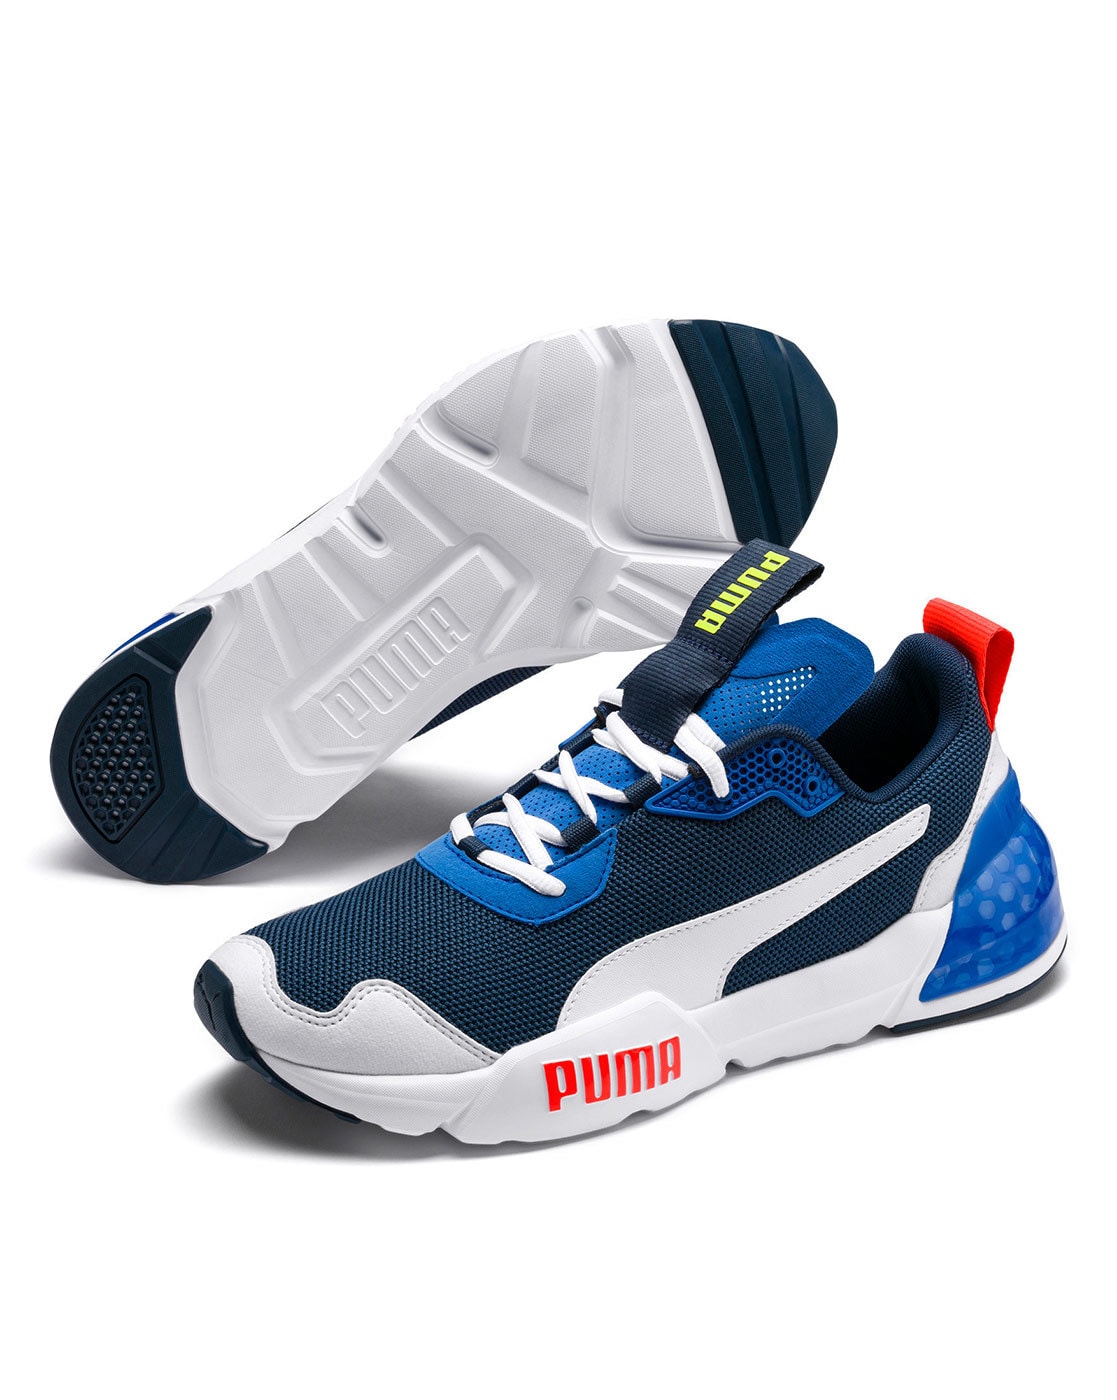 puma cell shoes